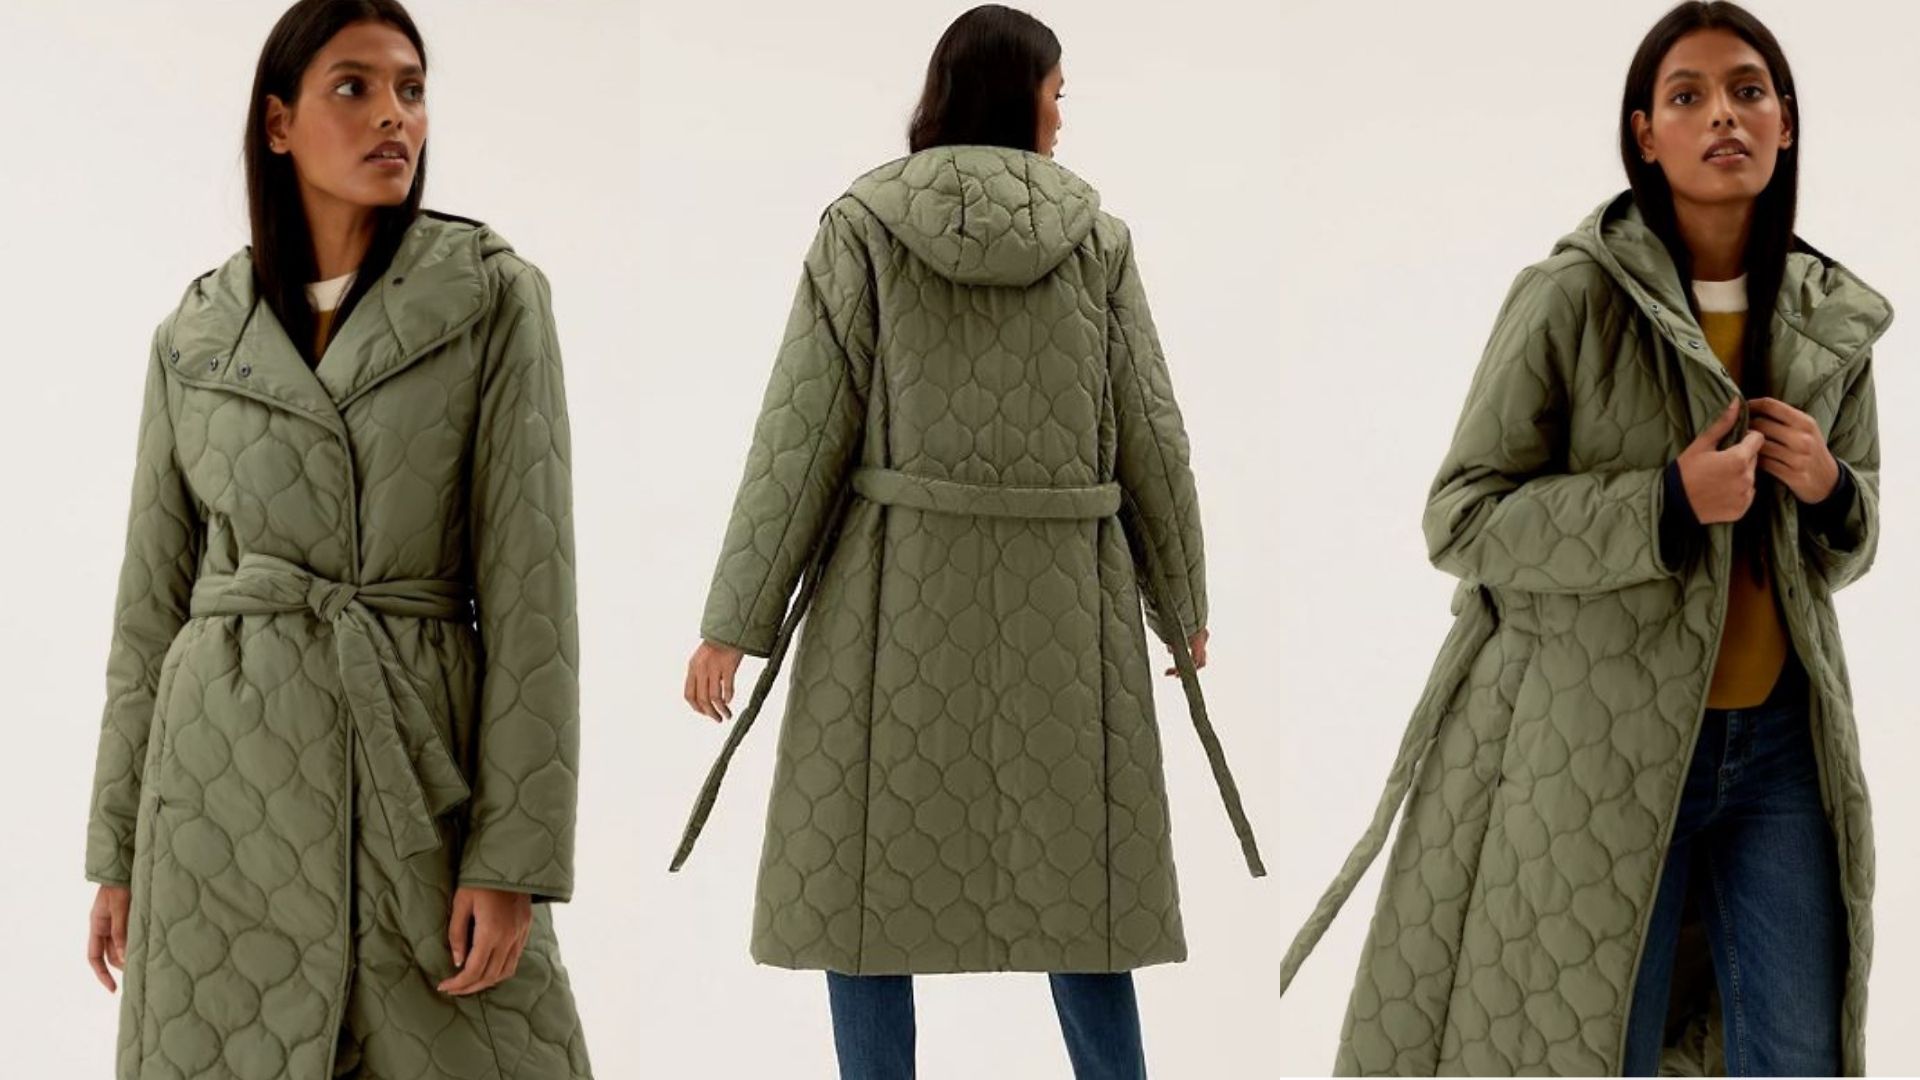 The Quilted Coat, M&S Collection